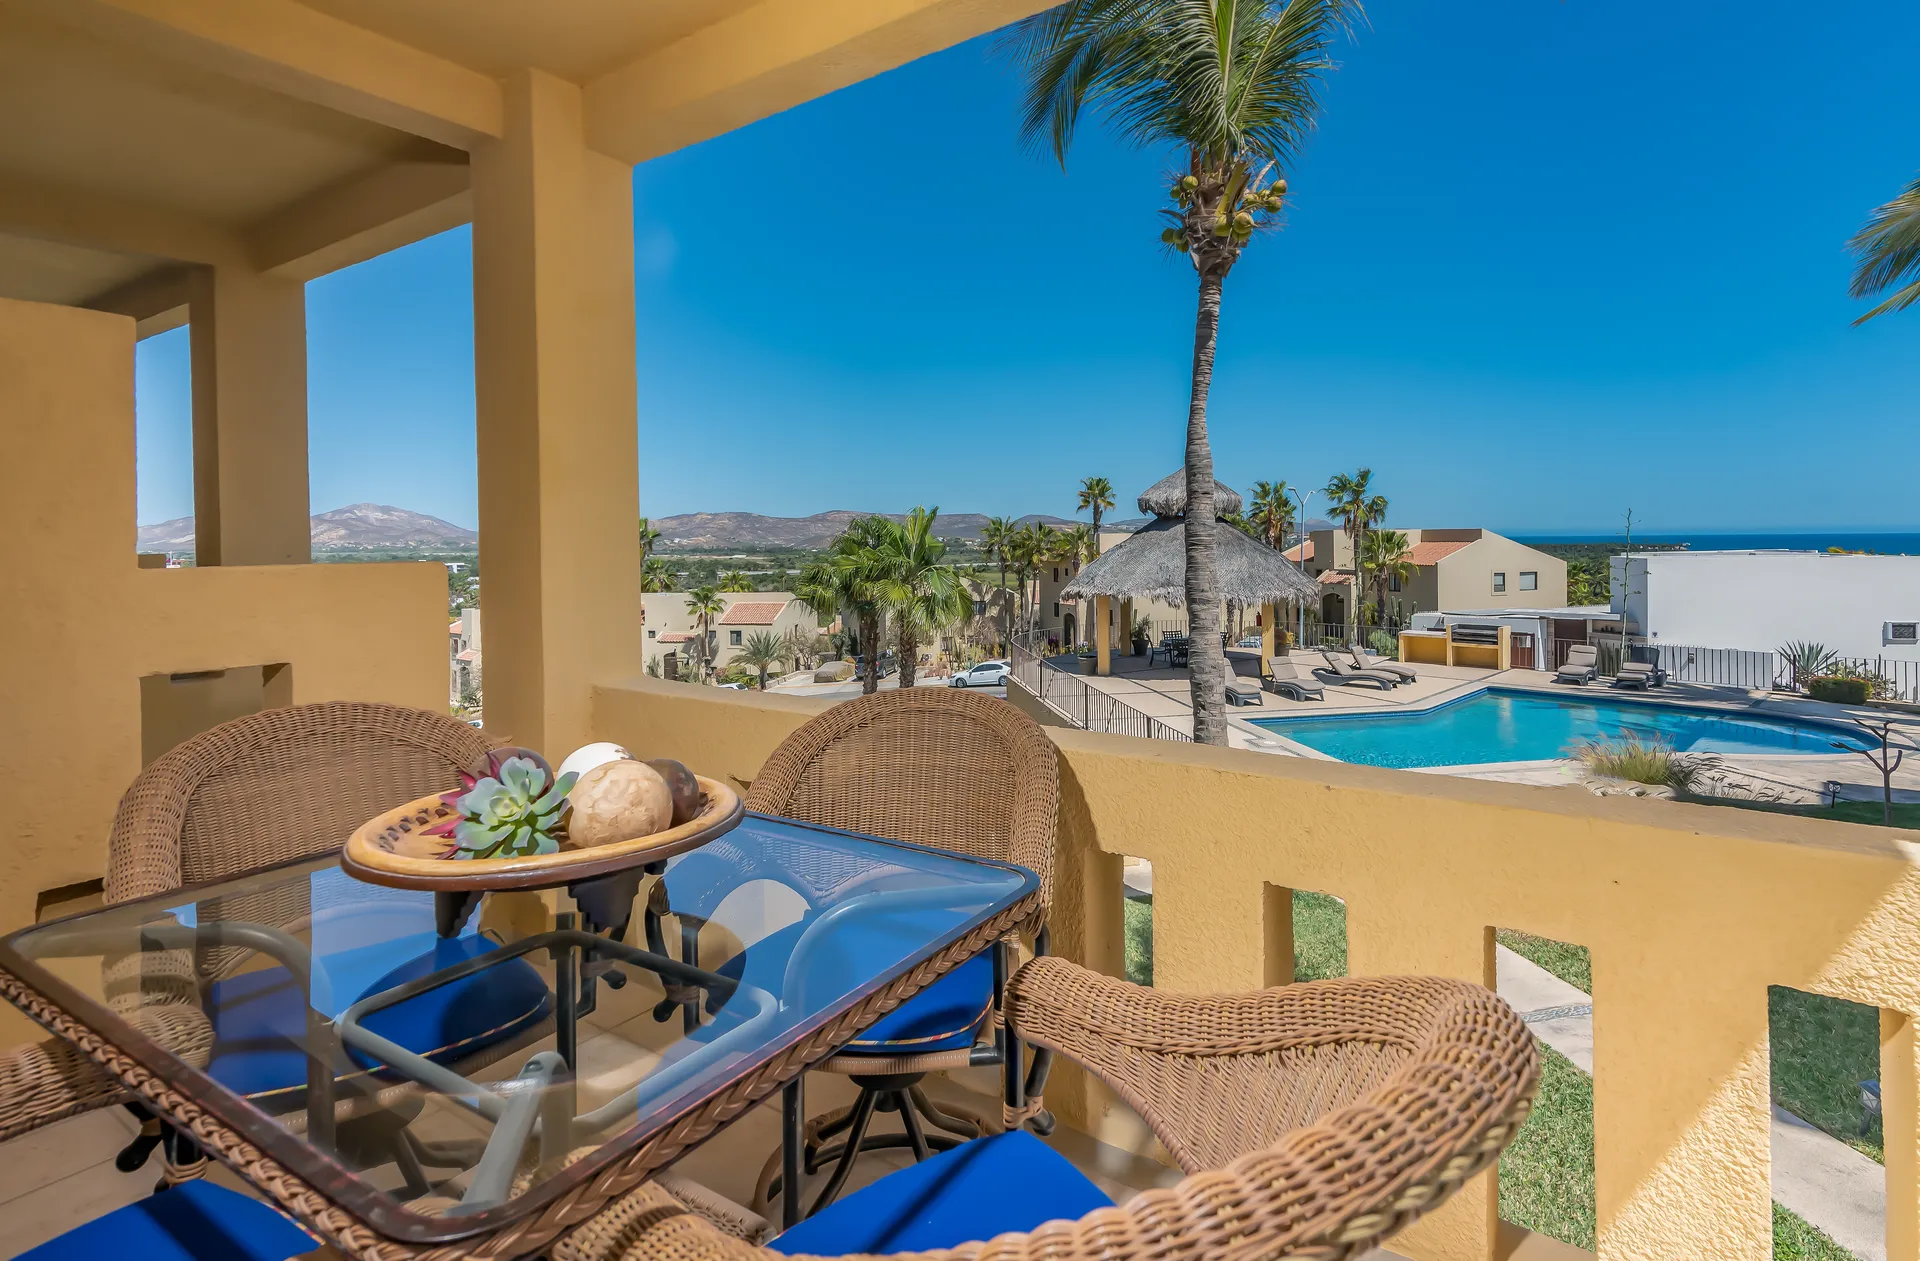 Cabo del Mar Unit 203 is a charming oceanview 2 bedroom 2 bath condominium that is located a short walk to San Jose del Cabo's historic downtown